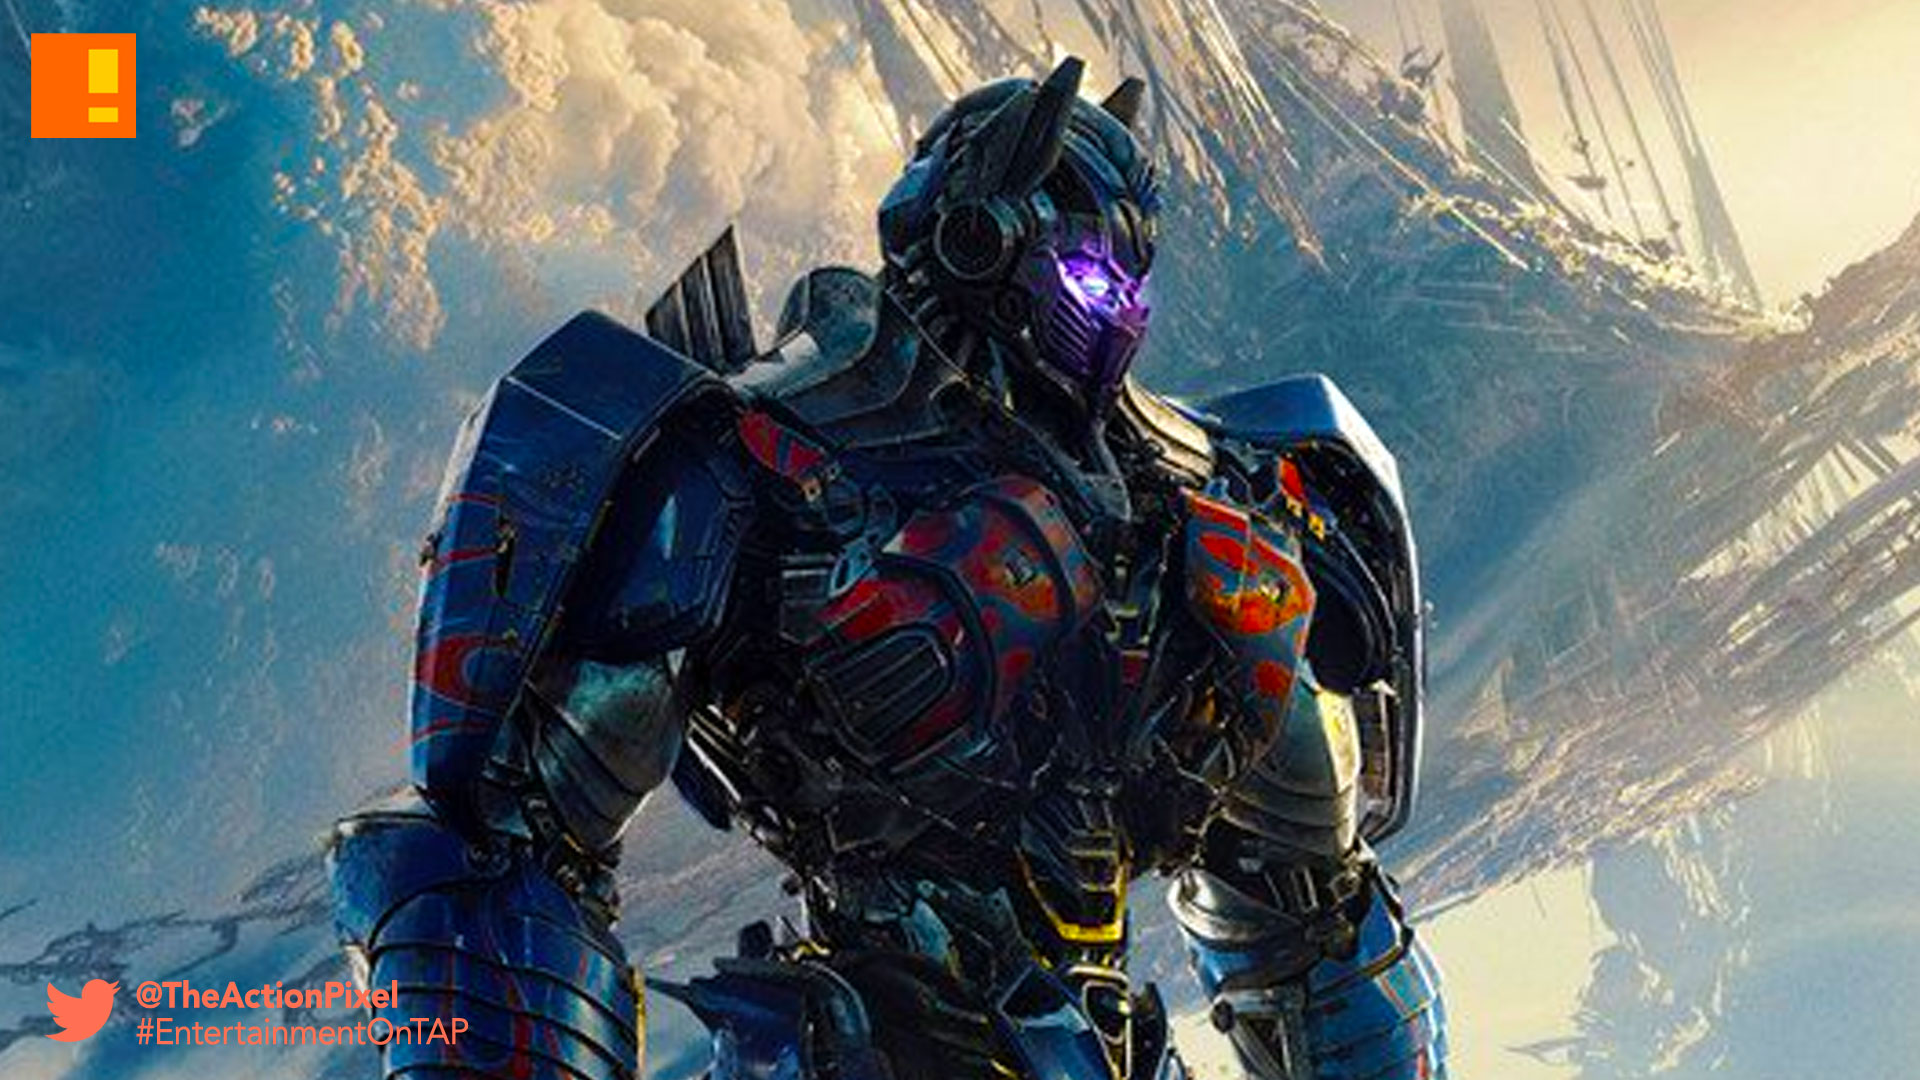 transformers, poster, the last knight, paramount pictures, michael bay, entertainment on tap, the action pixel